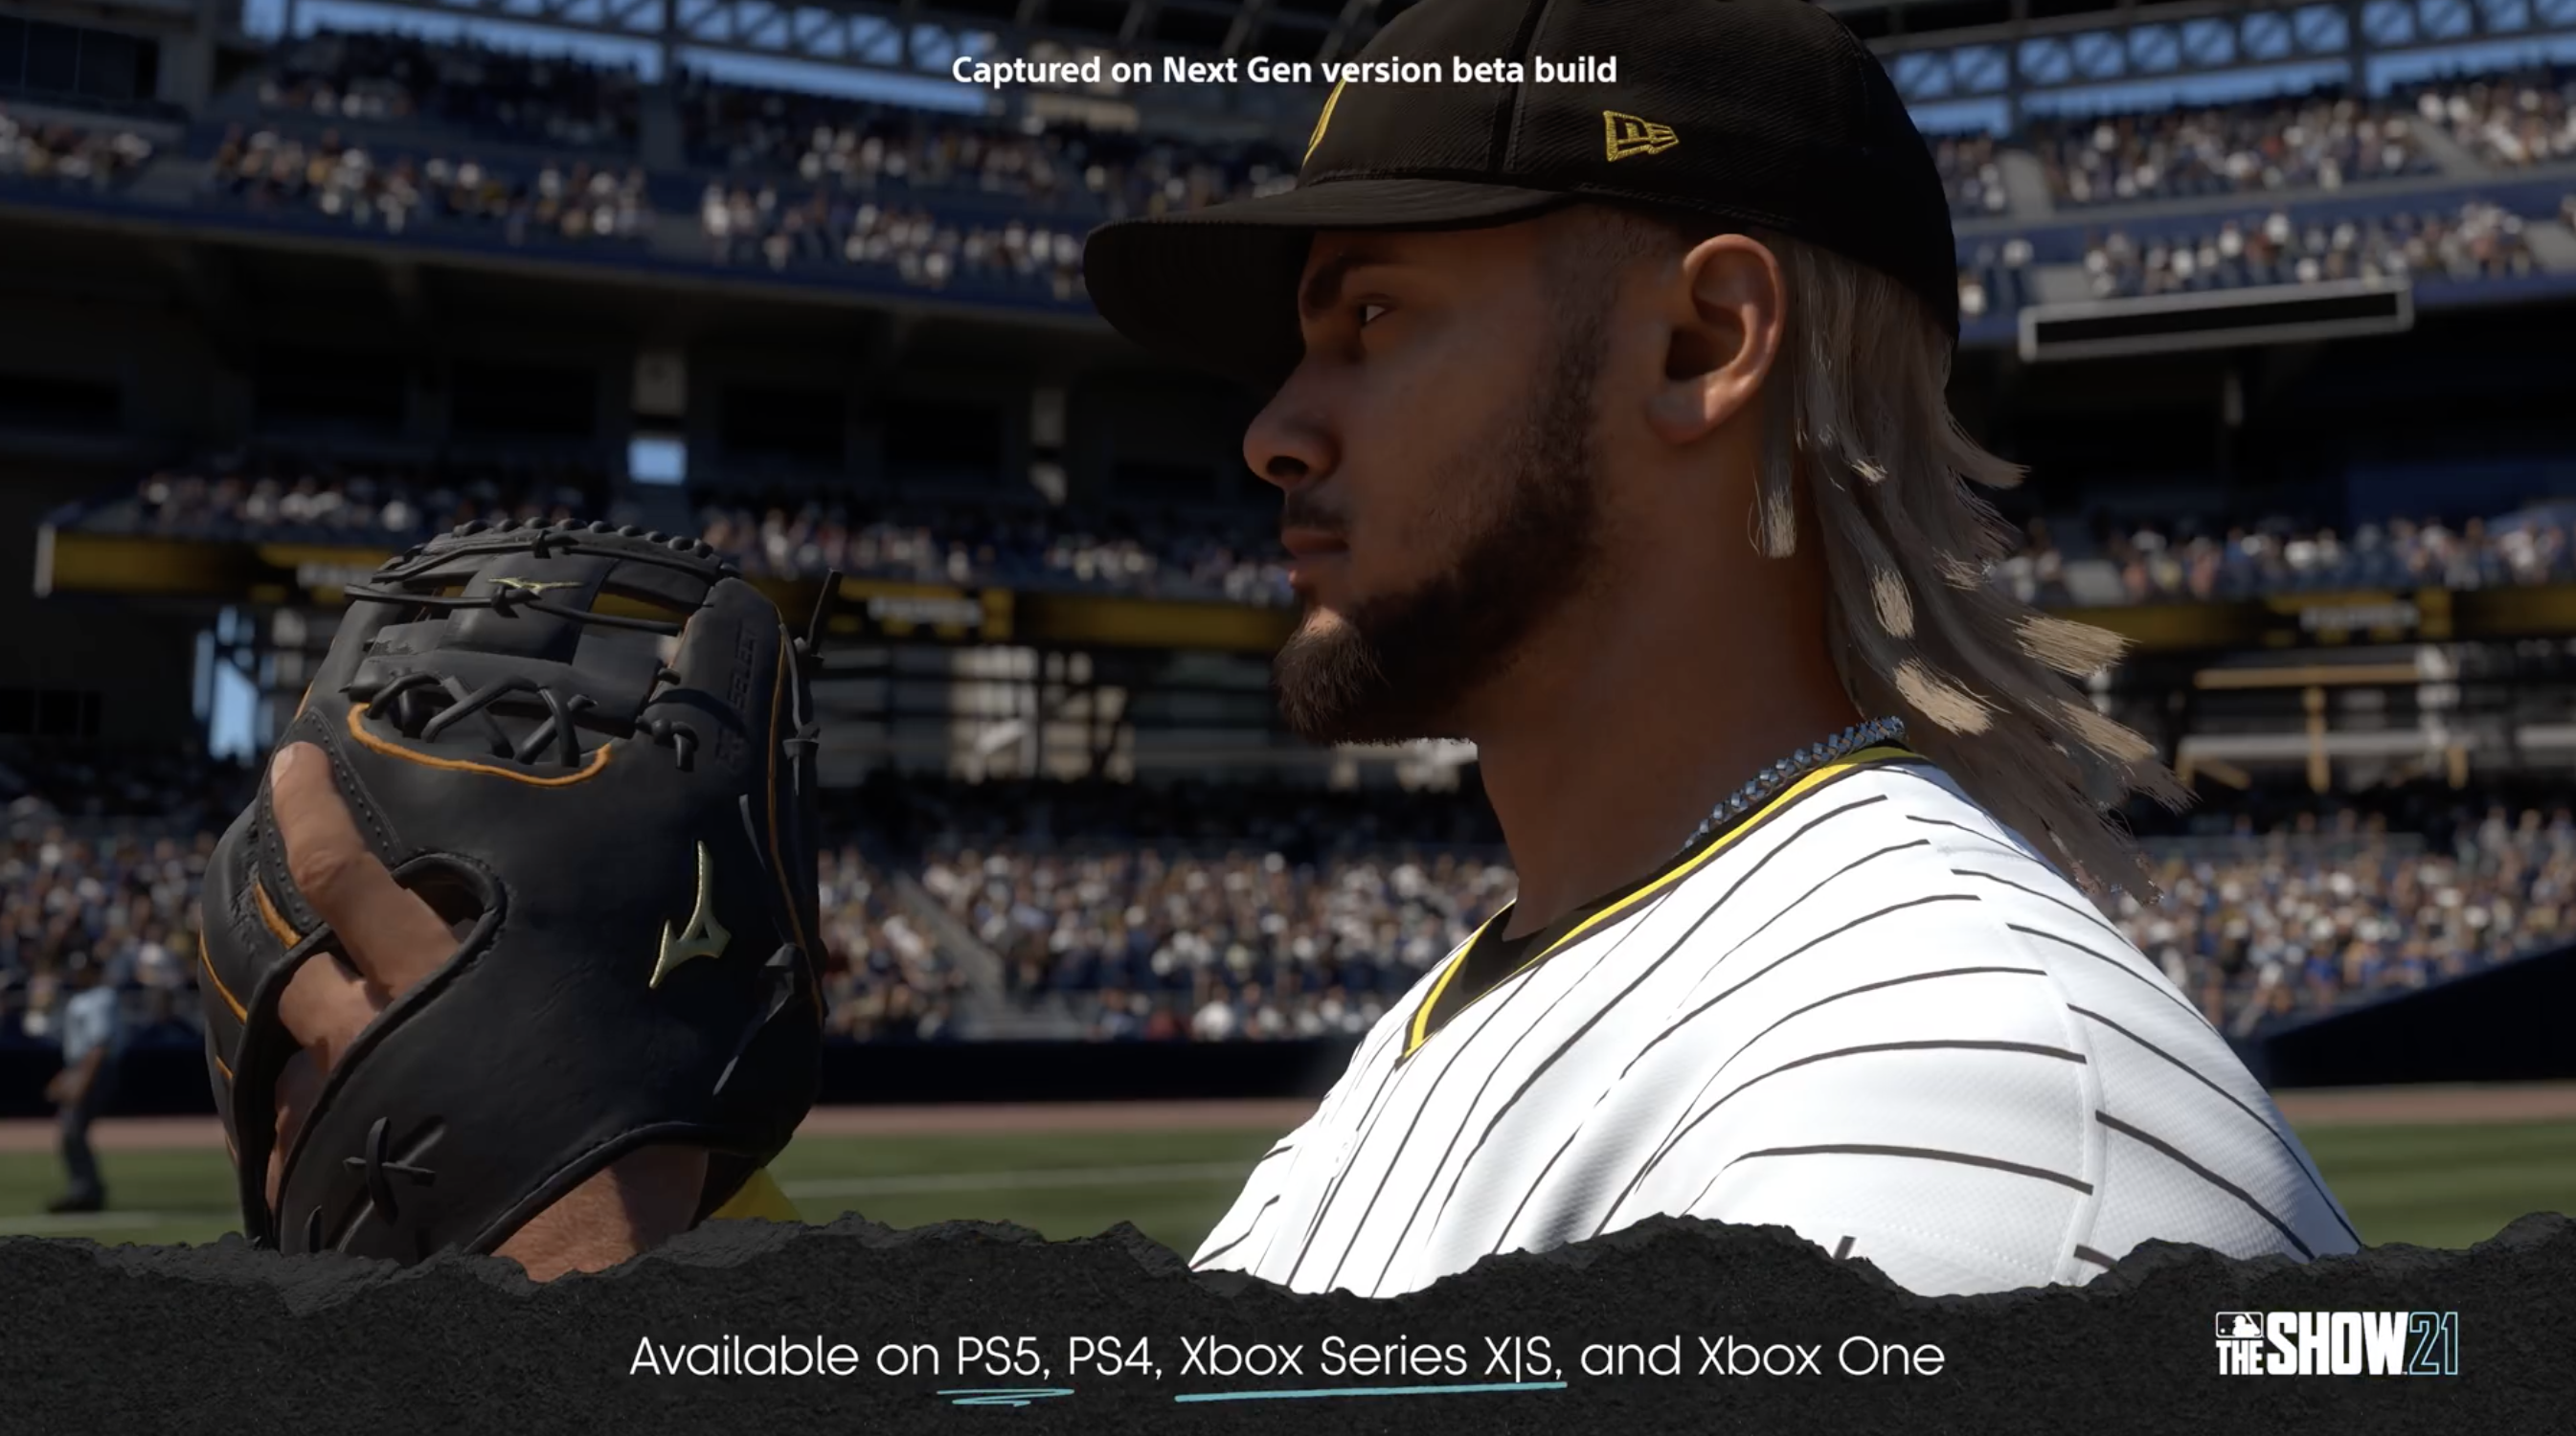 MLB The Show 21 - All MLB Uniforms Shown - Operation Sports